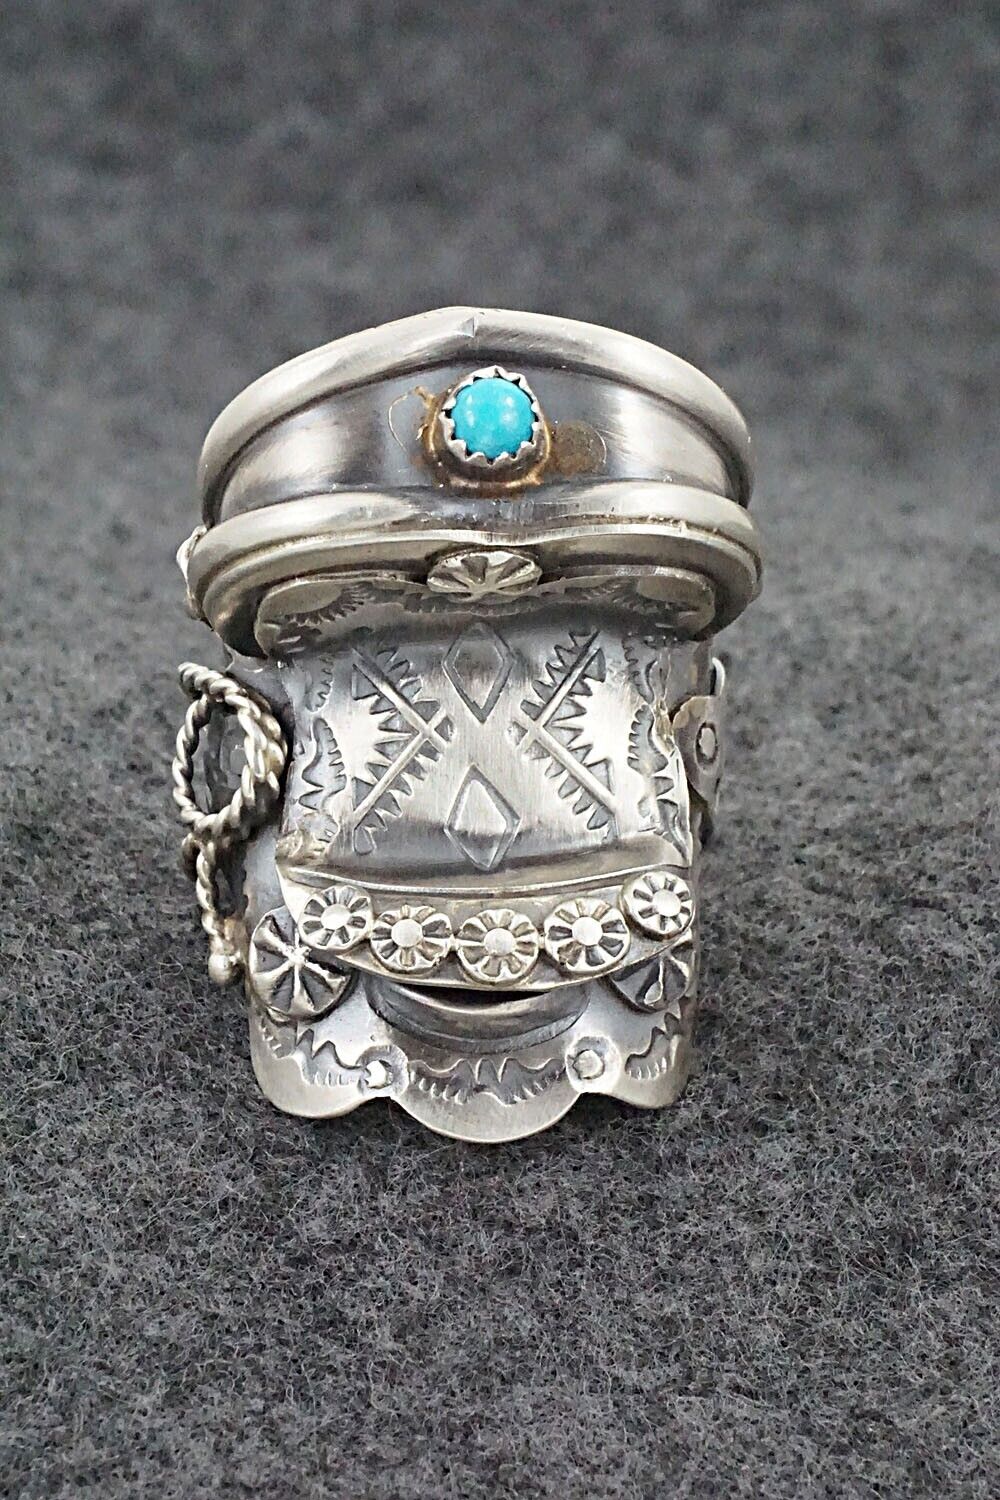 Turquoise & Sterling Silver Ring - Tim Yazzie - Size 9